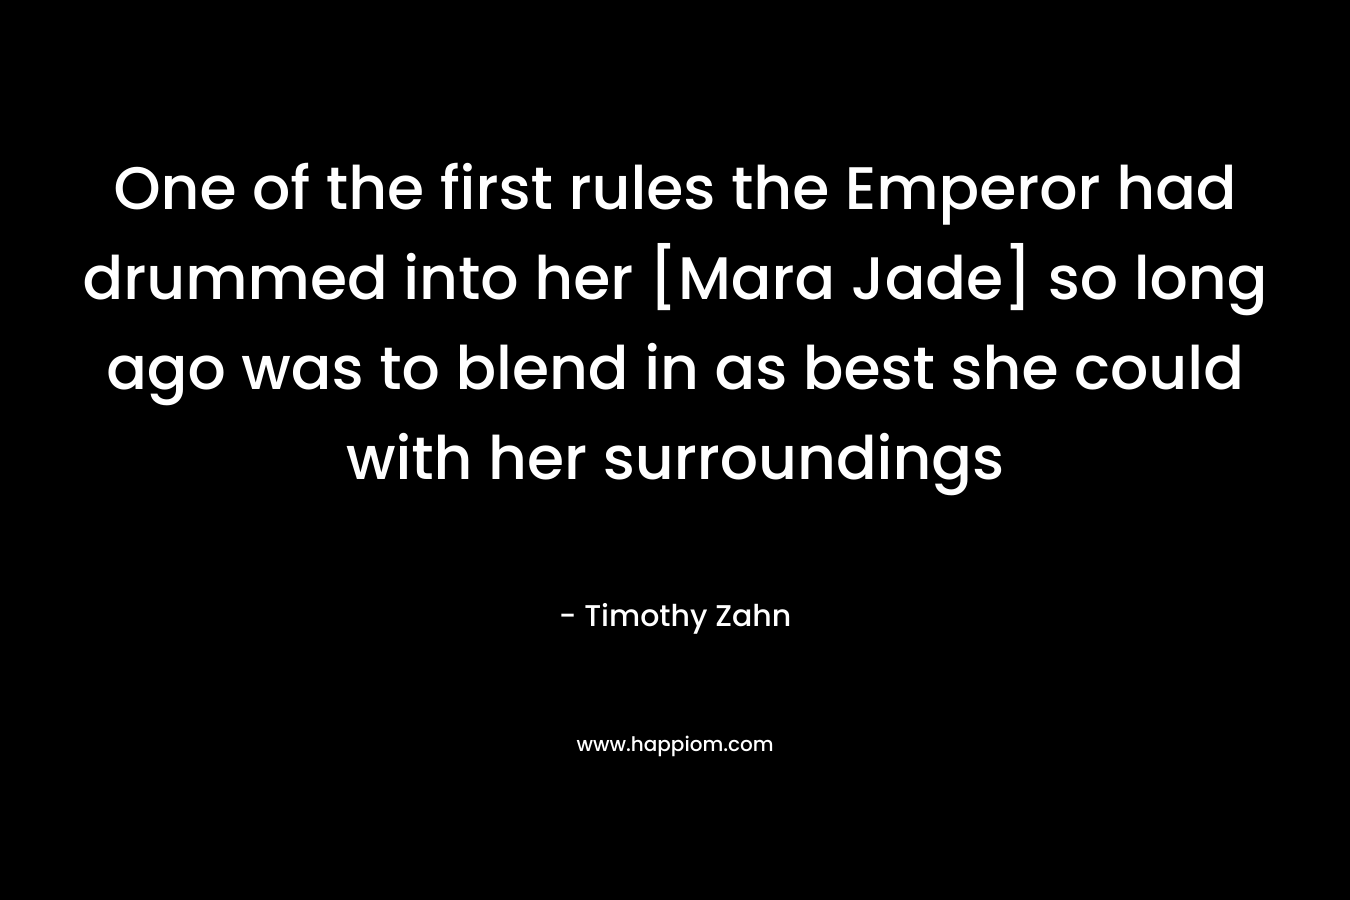 One of the first rules the Emperor had drummed into her [Mara Jade] so long ago was to blend in as best she could with her surroundings – Timothy Zahn